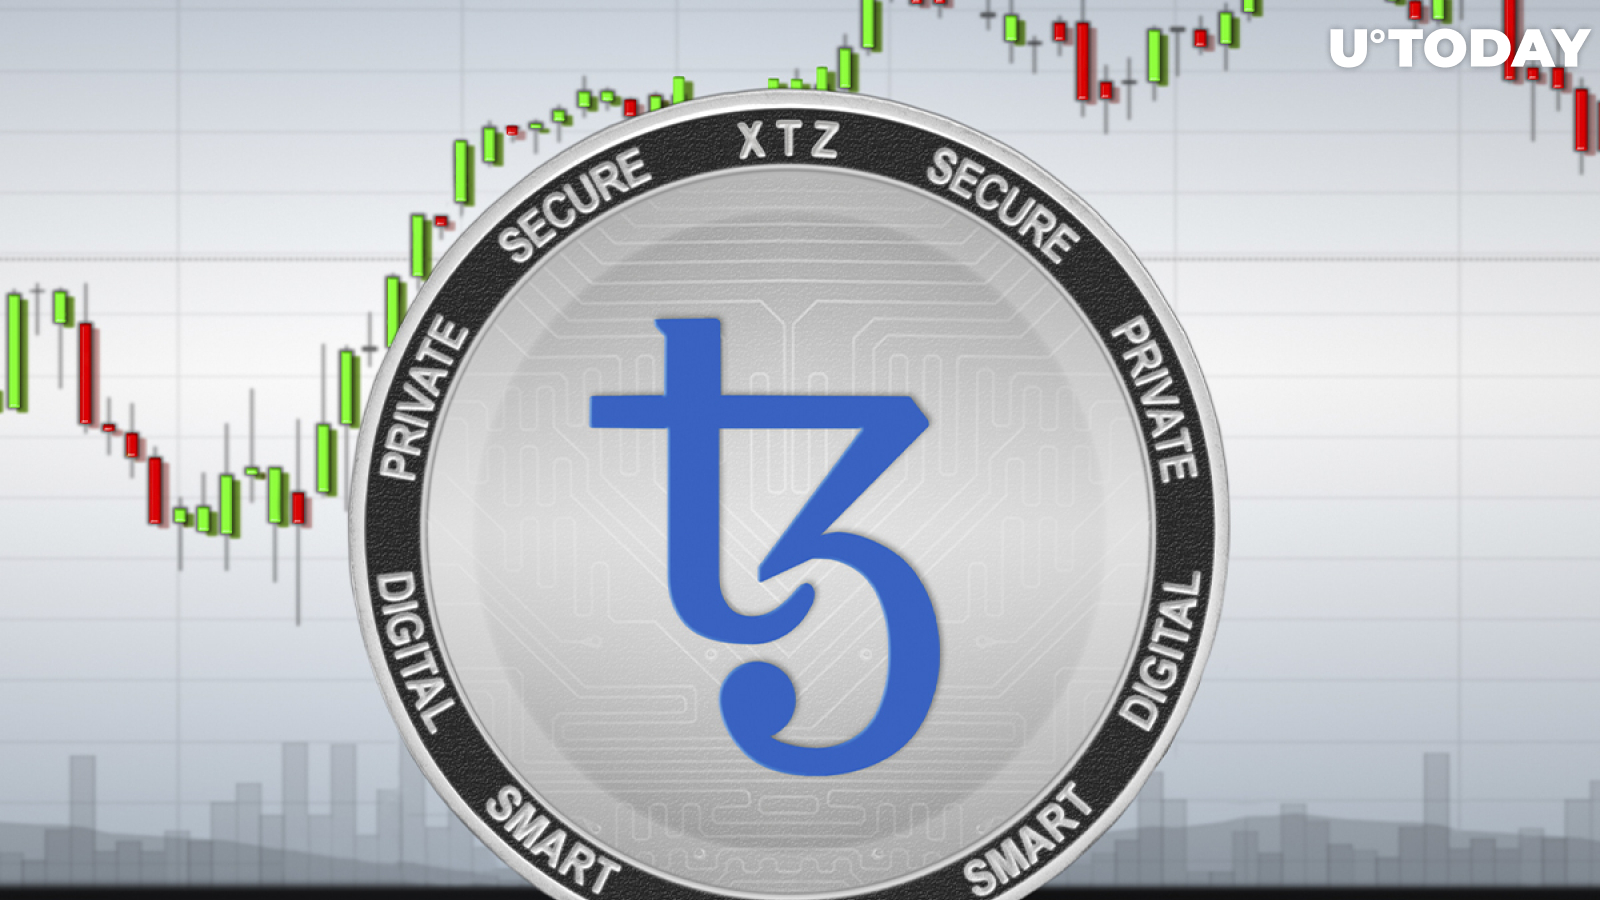 Tezos (XTZ) to Support Crypto Finance Group, InCore Bank, Inacta with Tokenization Tools: Details